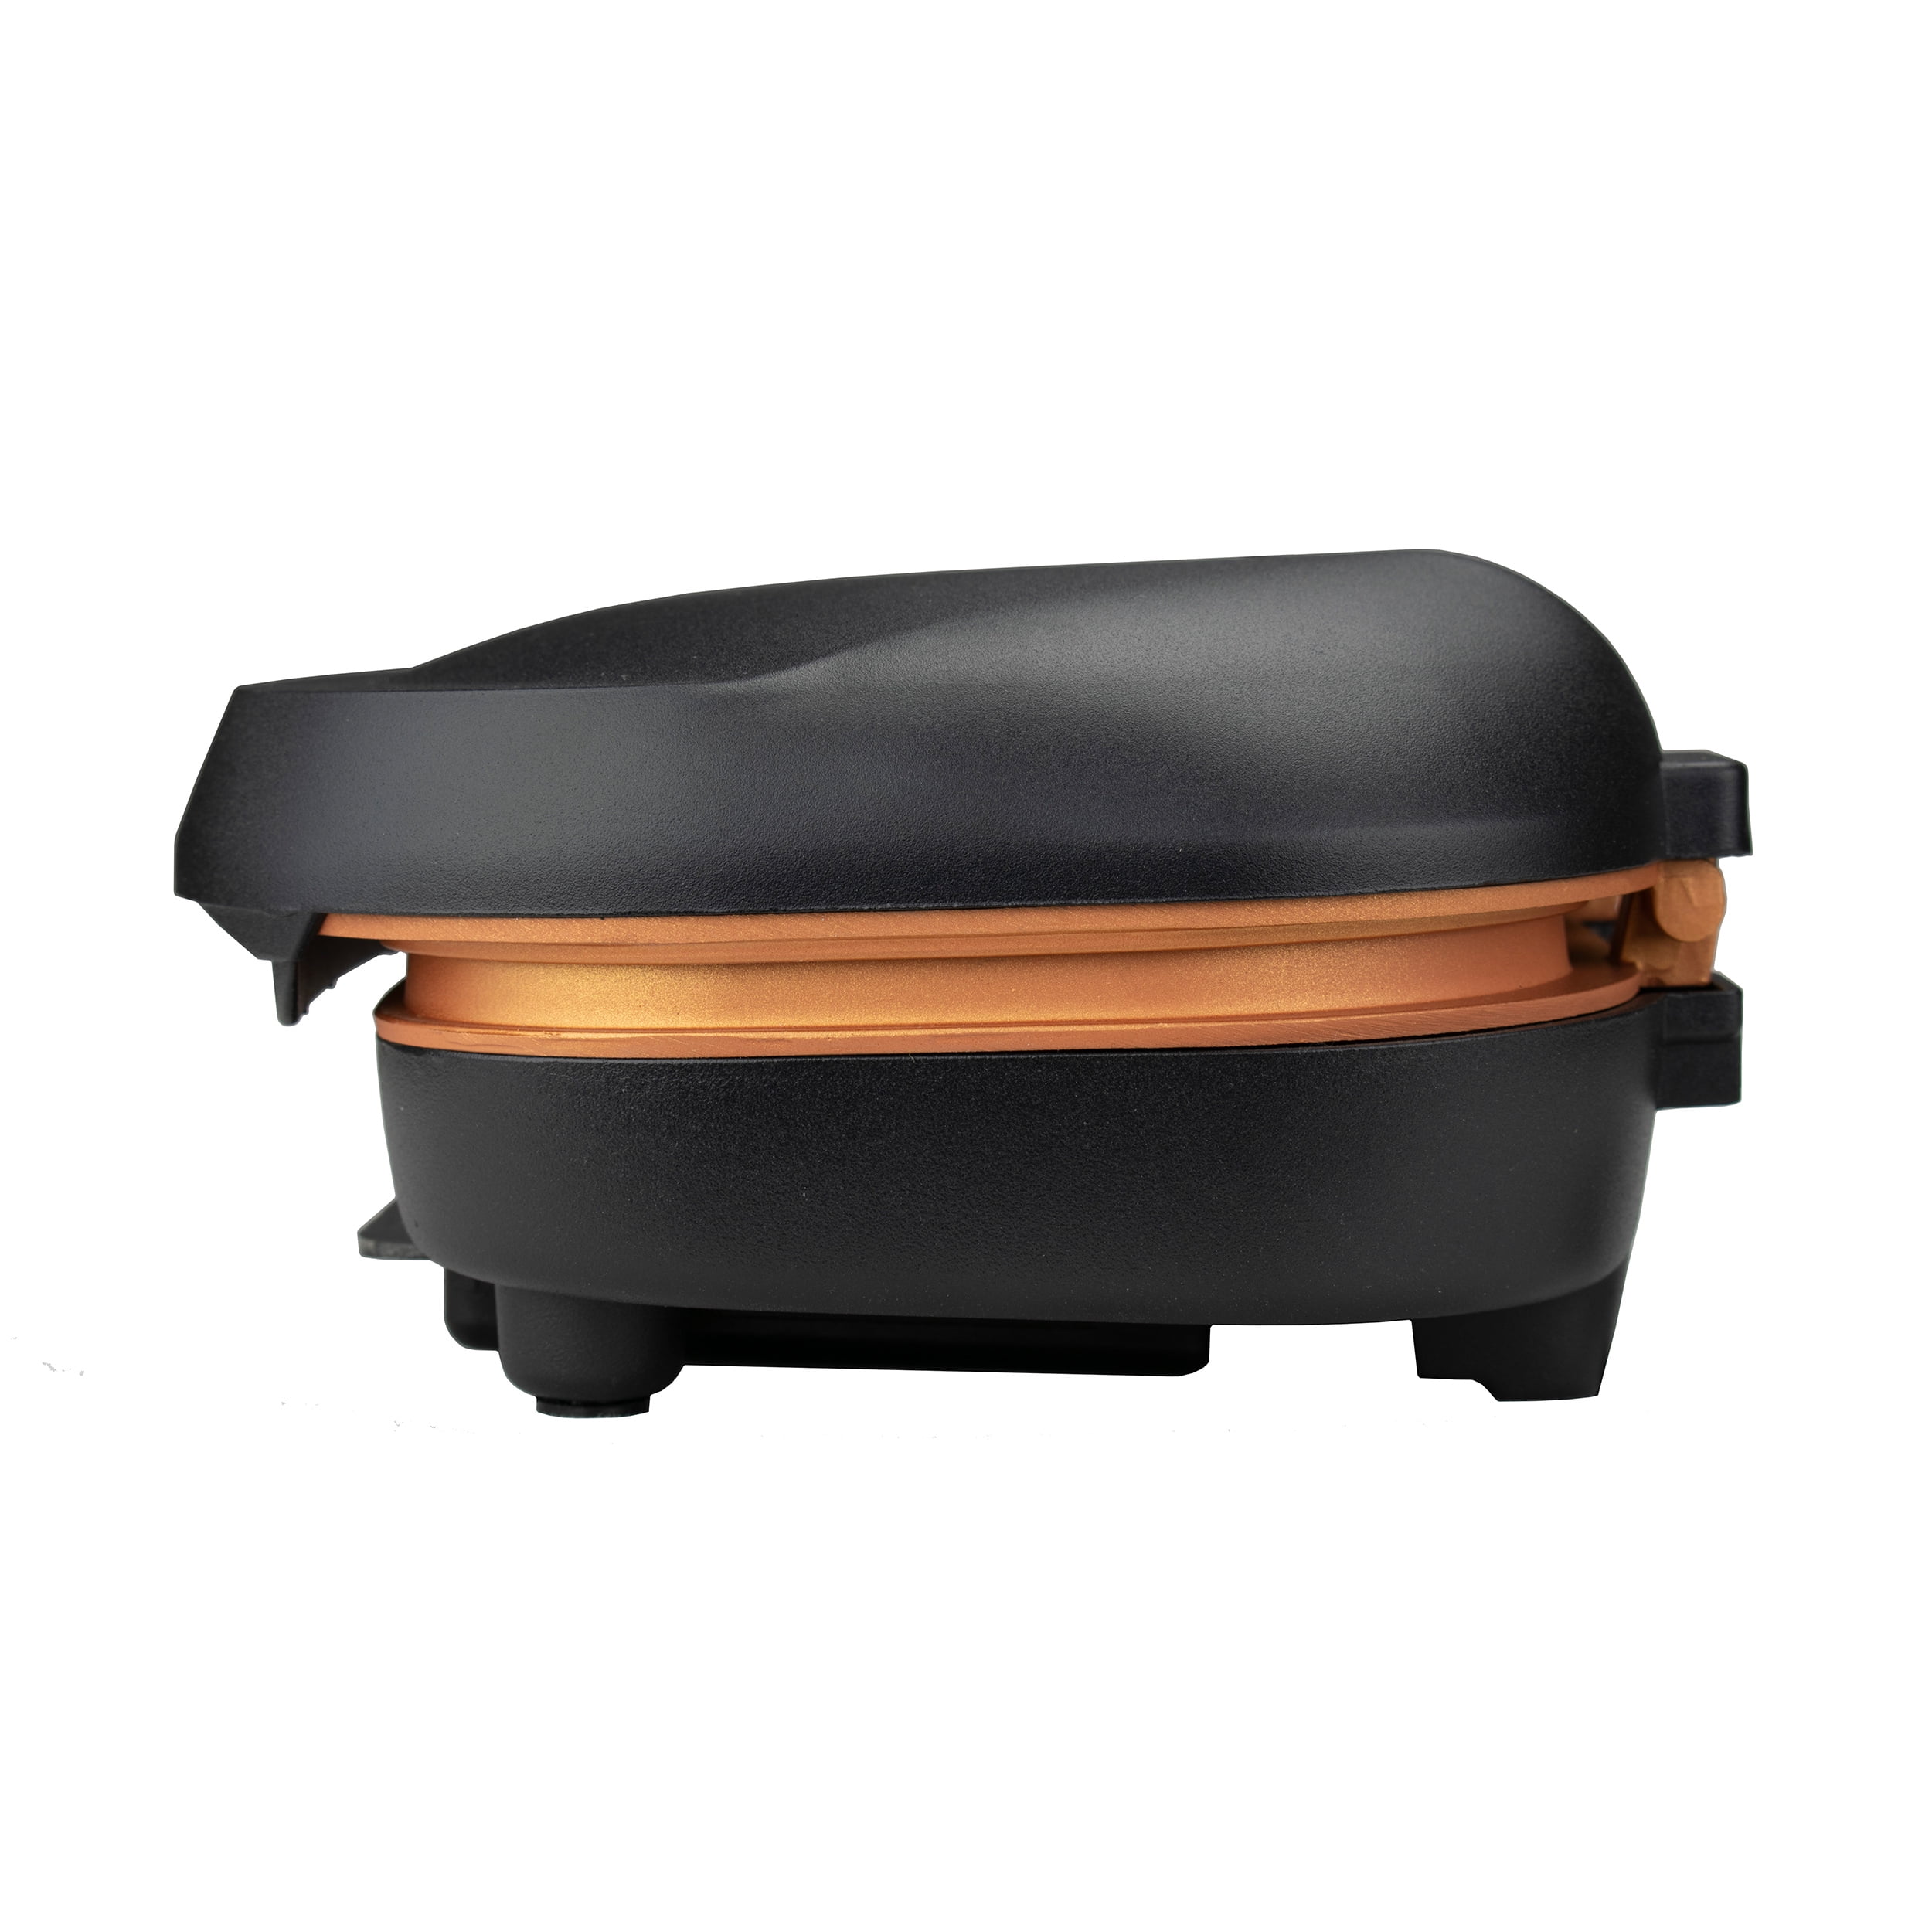 TS-606BK 2-Serving Nonstick 750W Electric Copper Grill & Panini Brentwood Appl 